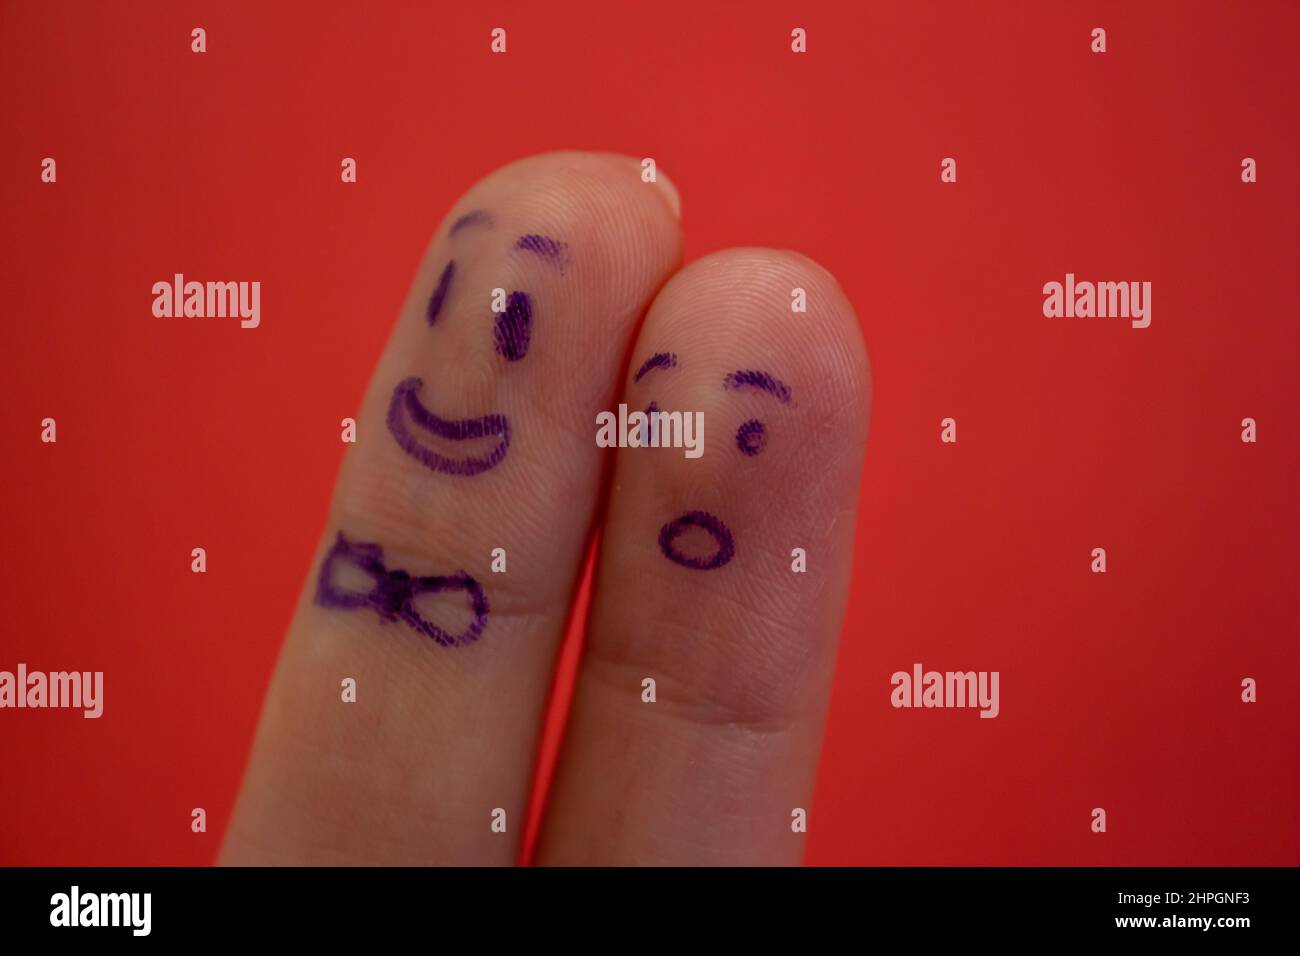 Smiley and shocked faces drawn on fingers isolated on red background. Funny facial expressions on fingers. Stock Photo